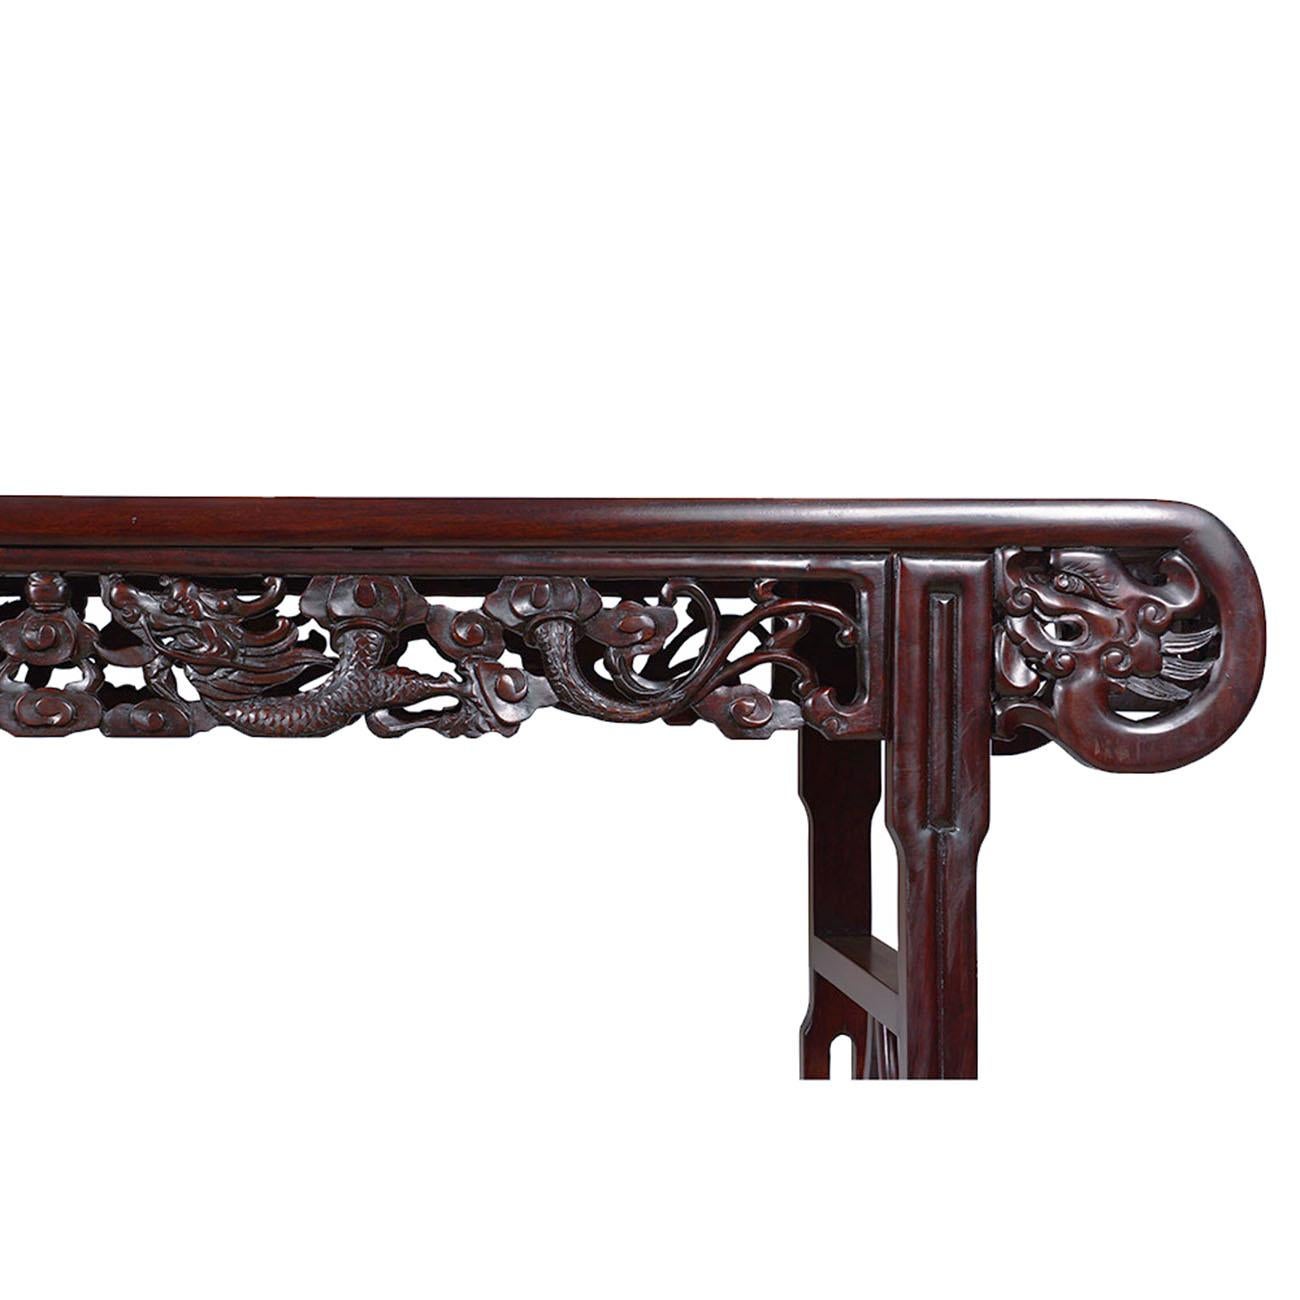 20th Century Antique Chinese Carved Rosewood Altar Table, Sofa Table, Entry Console